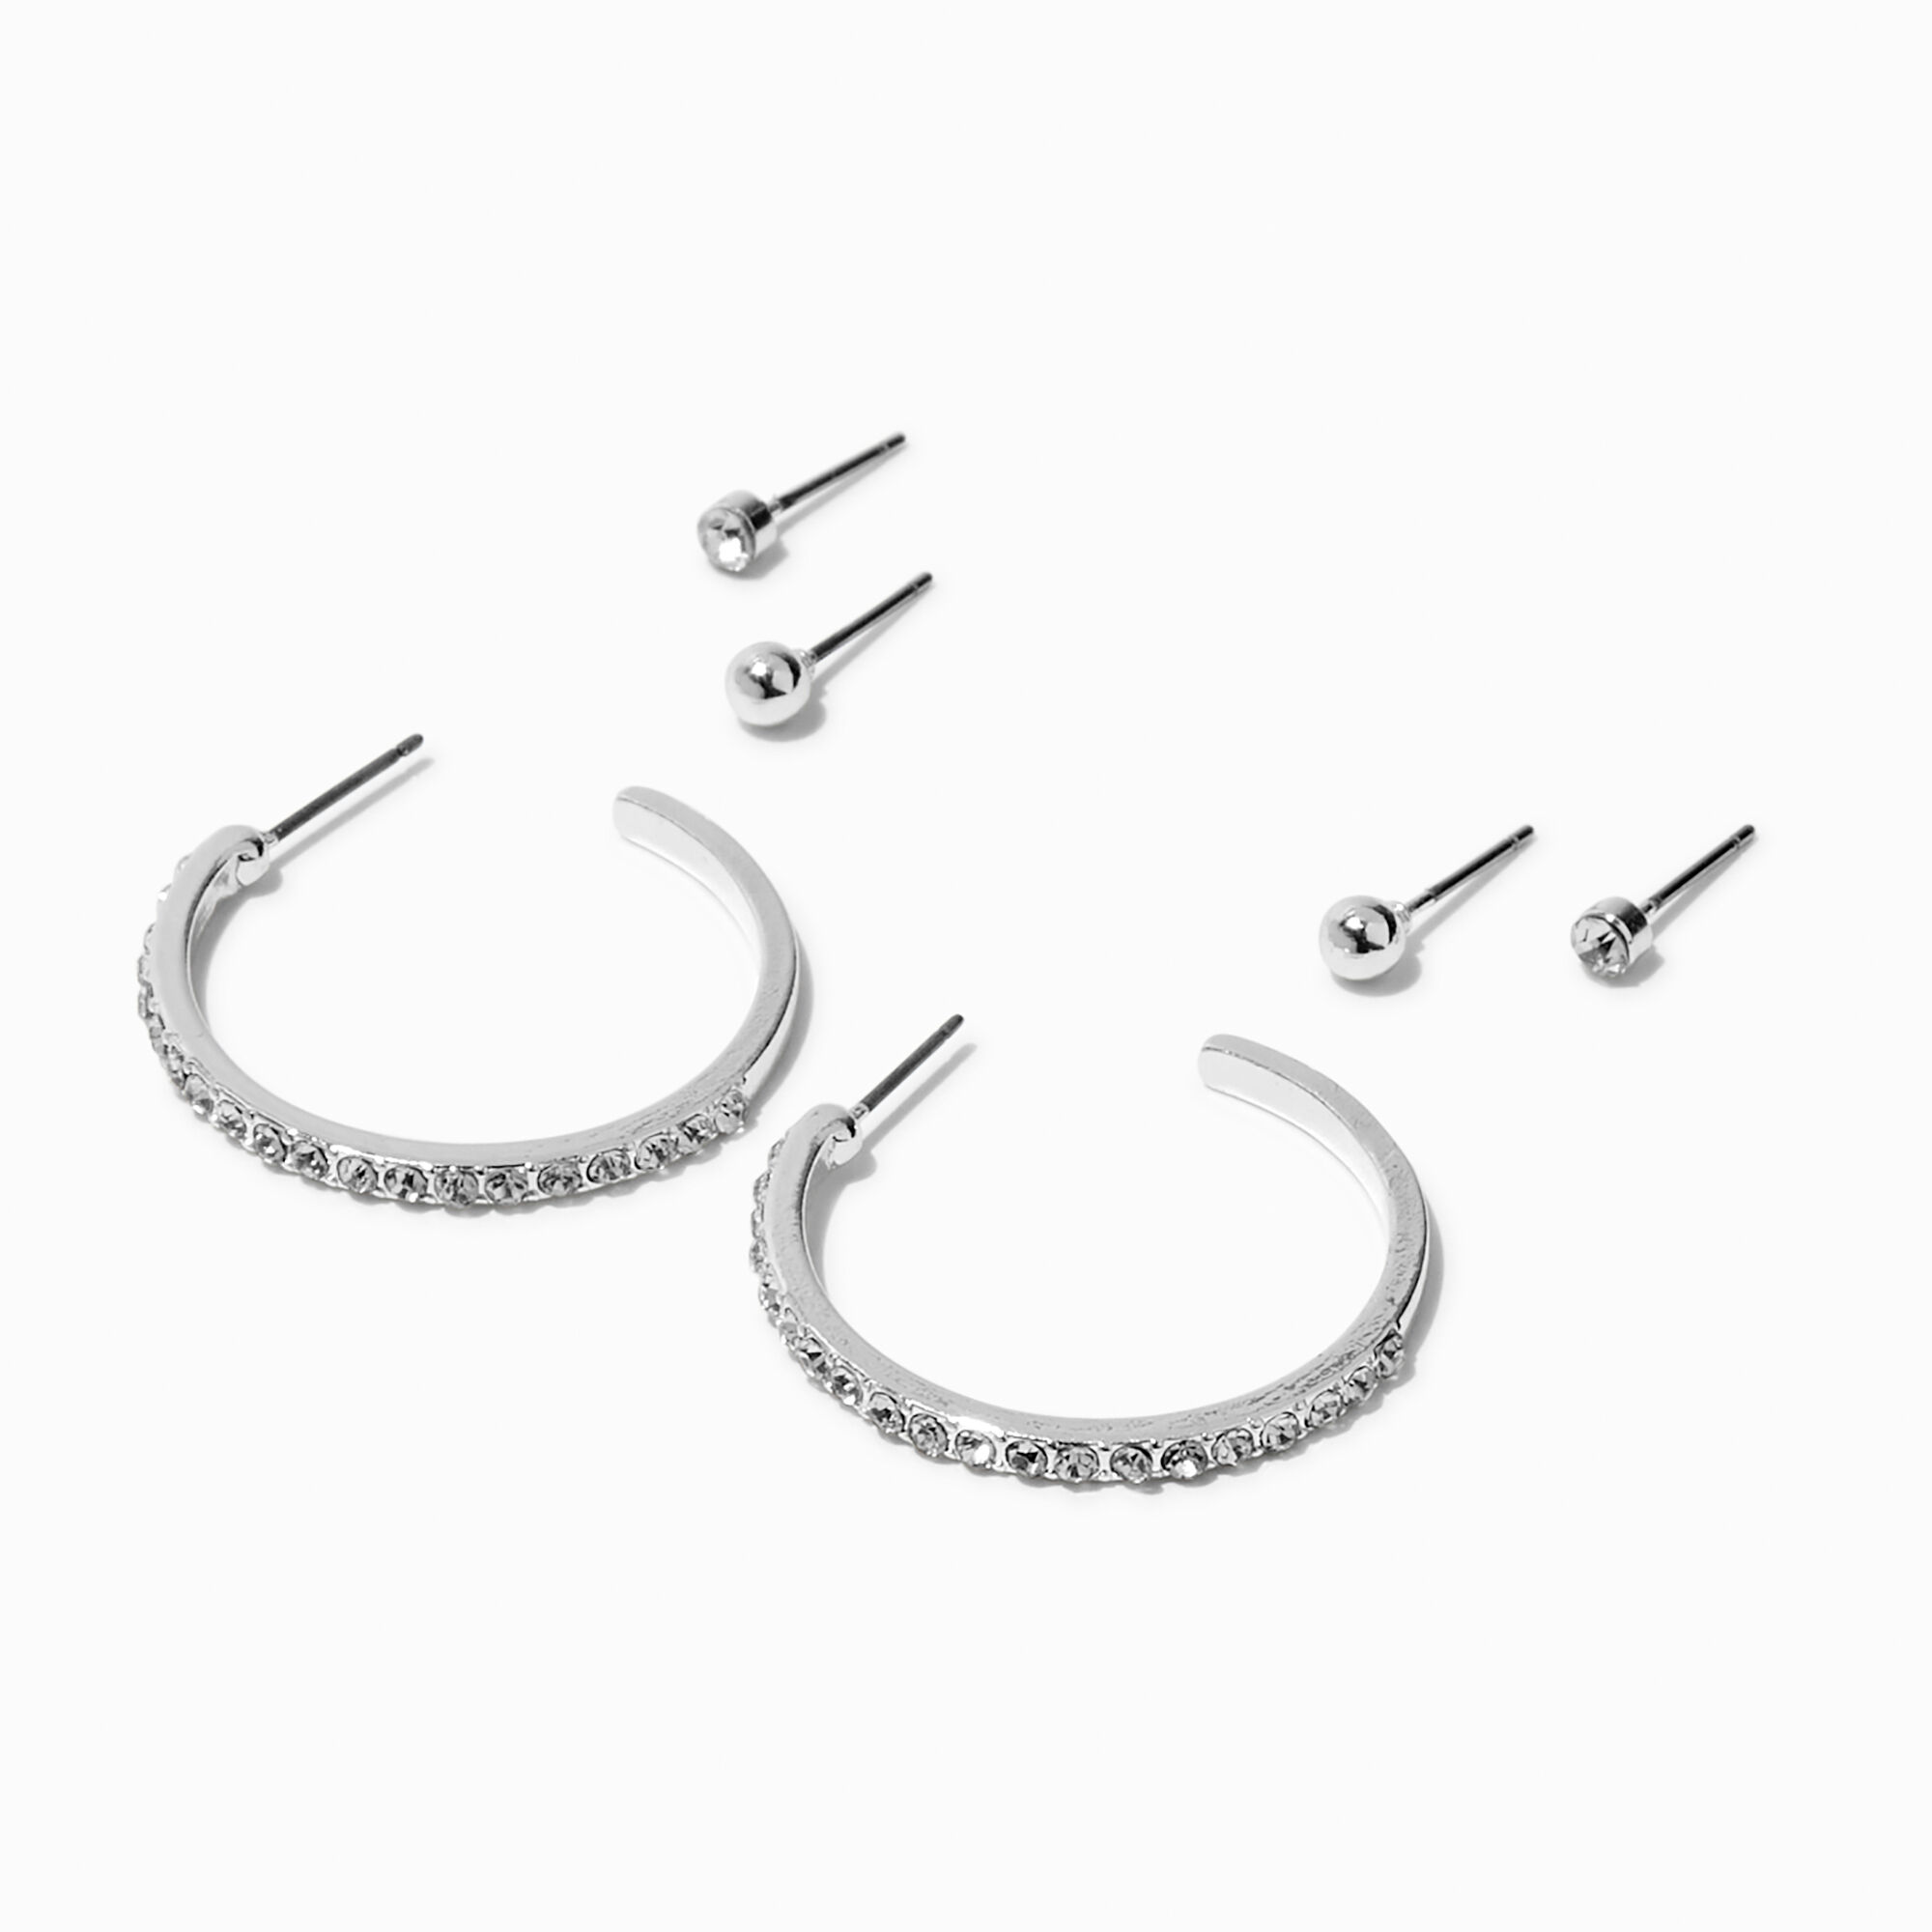 View Claires SilverTone Crystal 25MM Hoop Earrings Stack 3 Pack Gold information